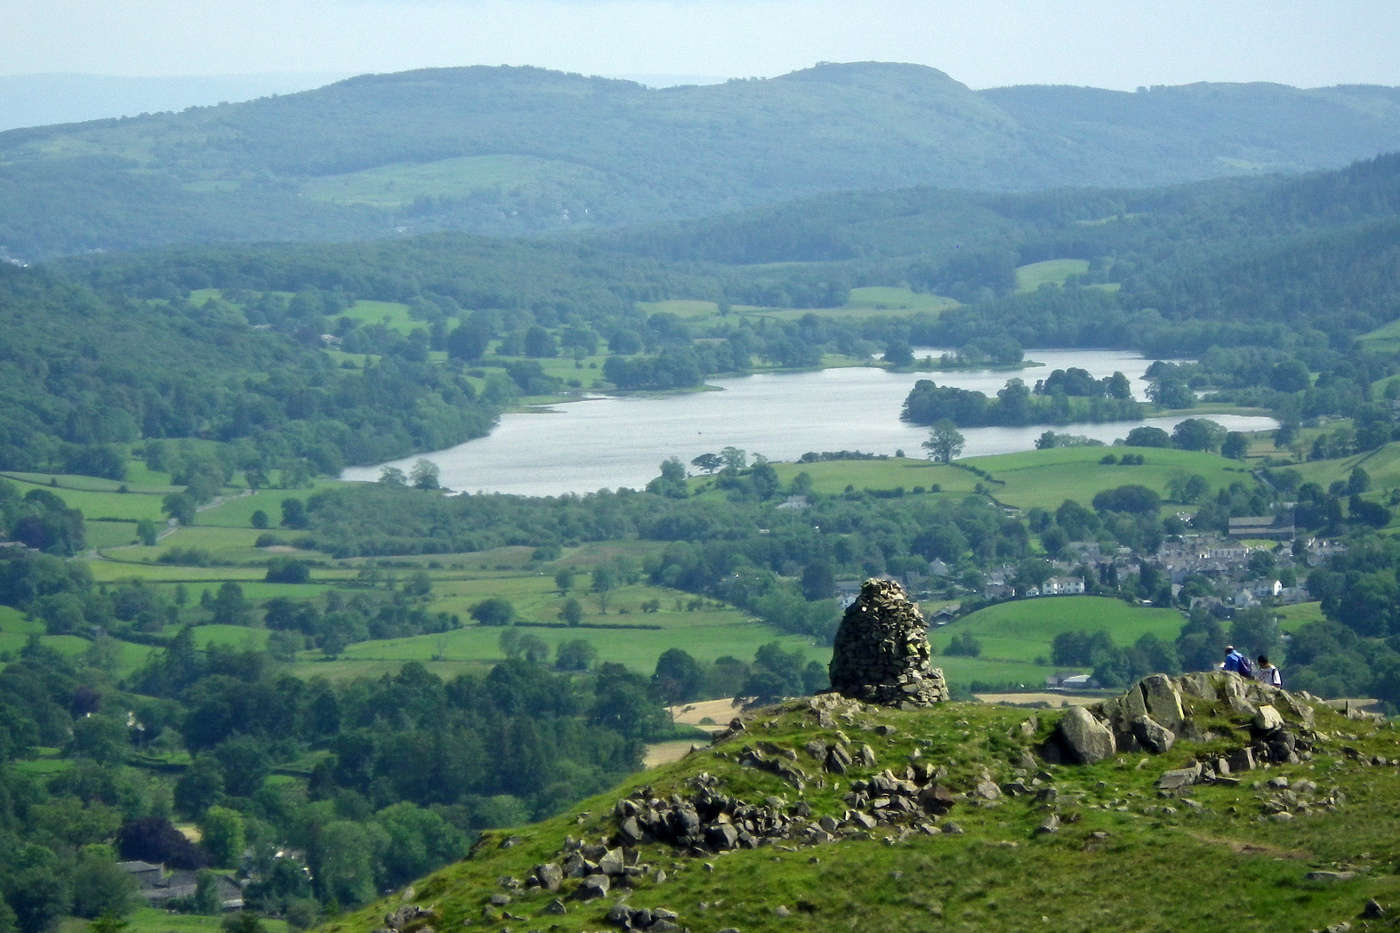 Looking down on Hawkshead and Esthwaite Water. Image by Andrew / CC BY 2.0